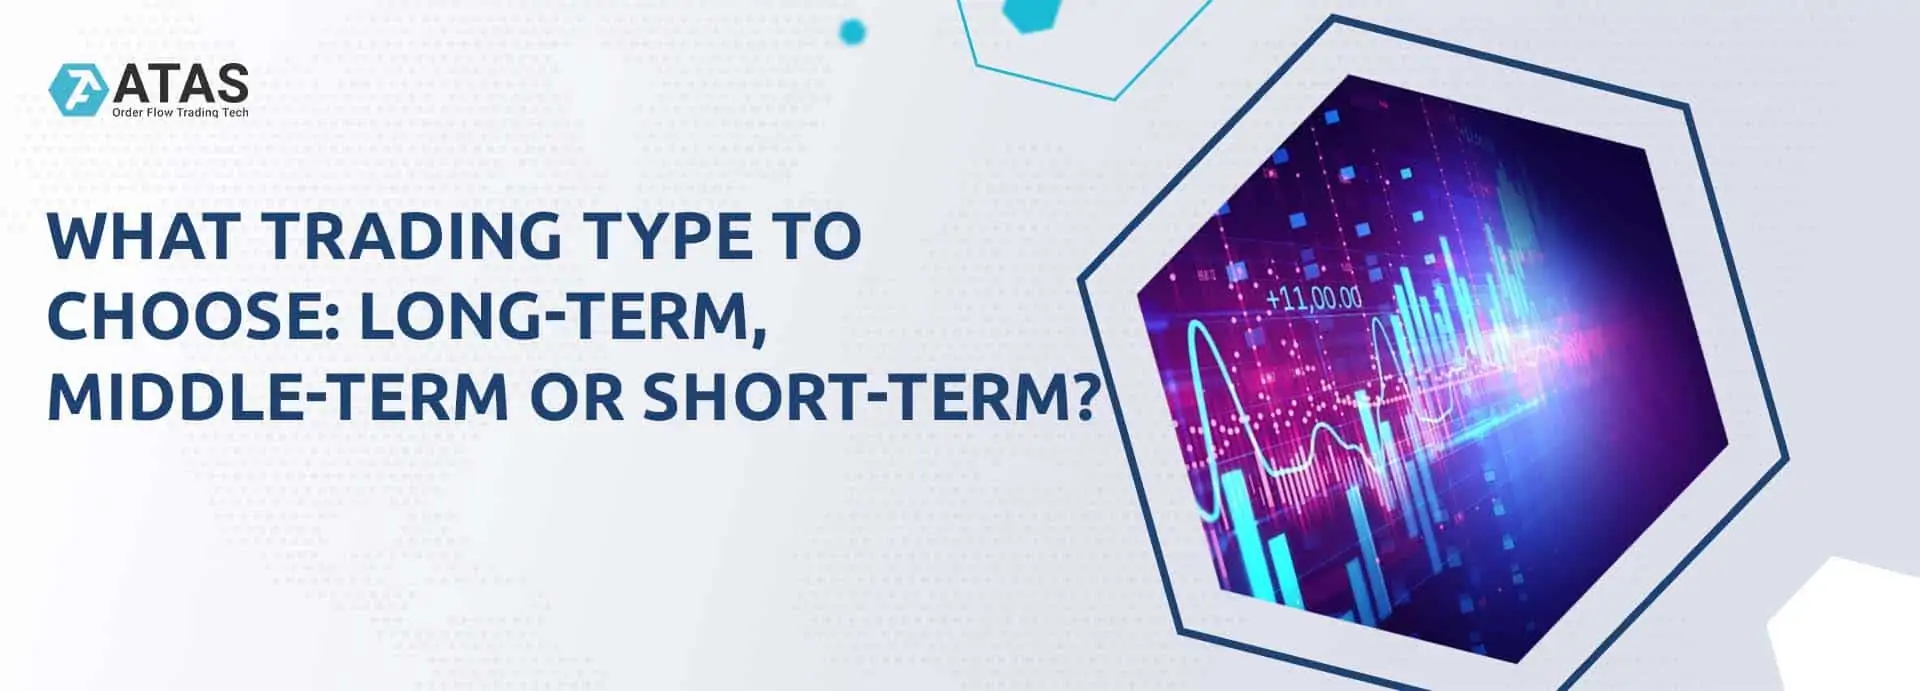 What trading type to choose long-term, middle-term or short-term